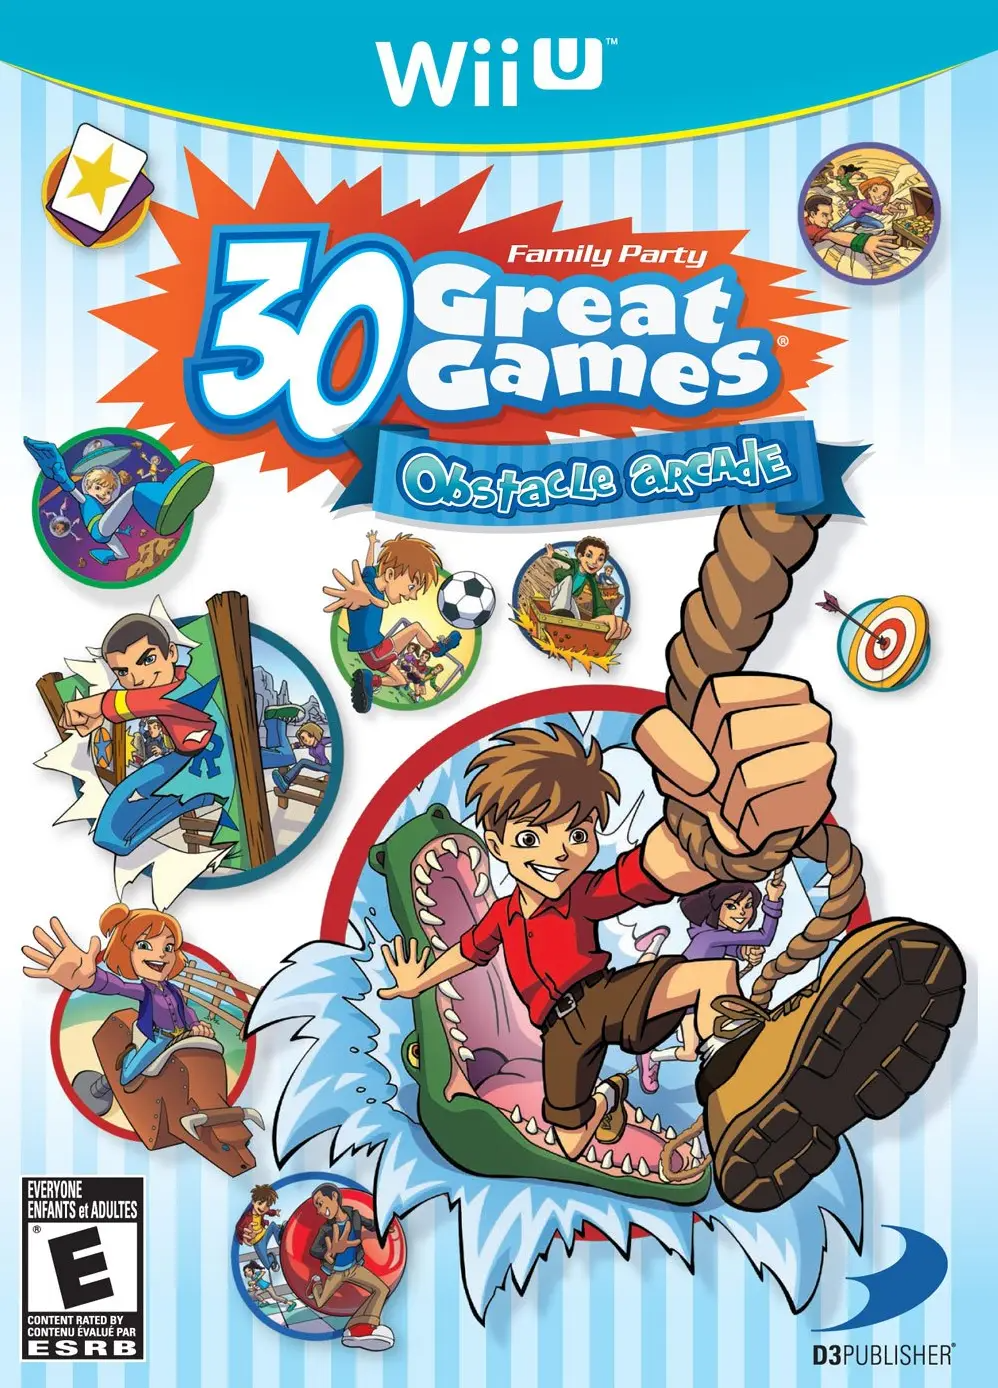 Family Party: 30 Great Games Obstacle Arcade WII U